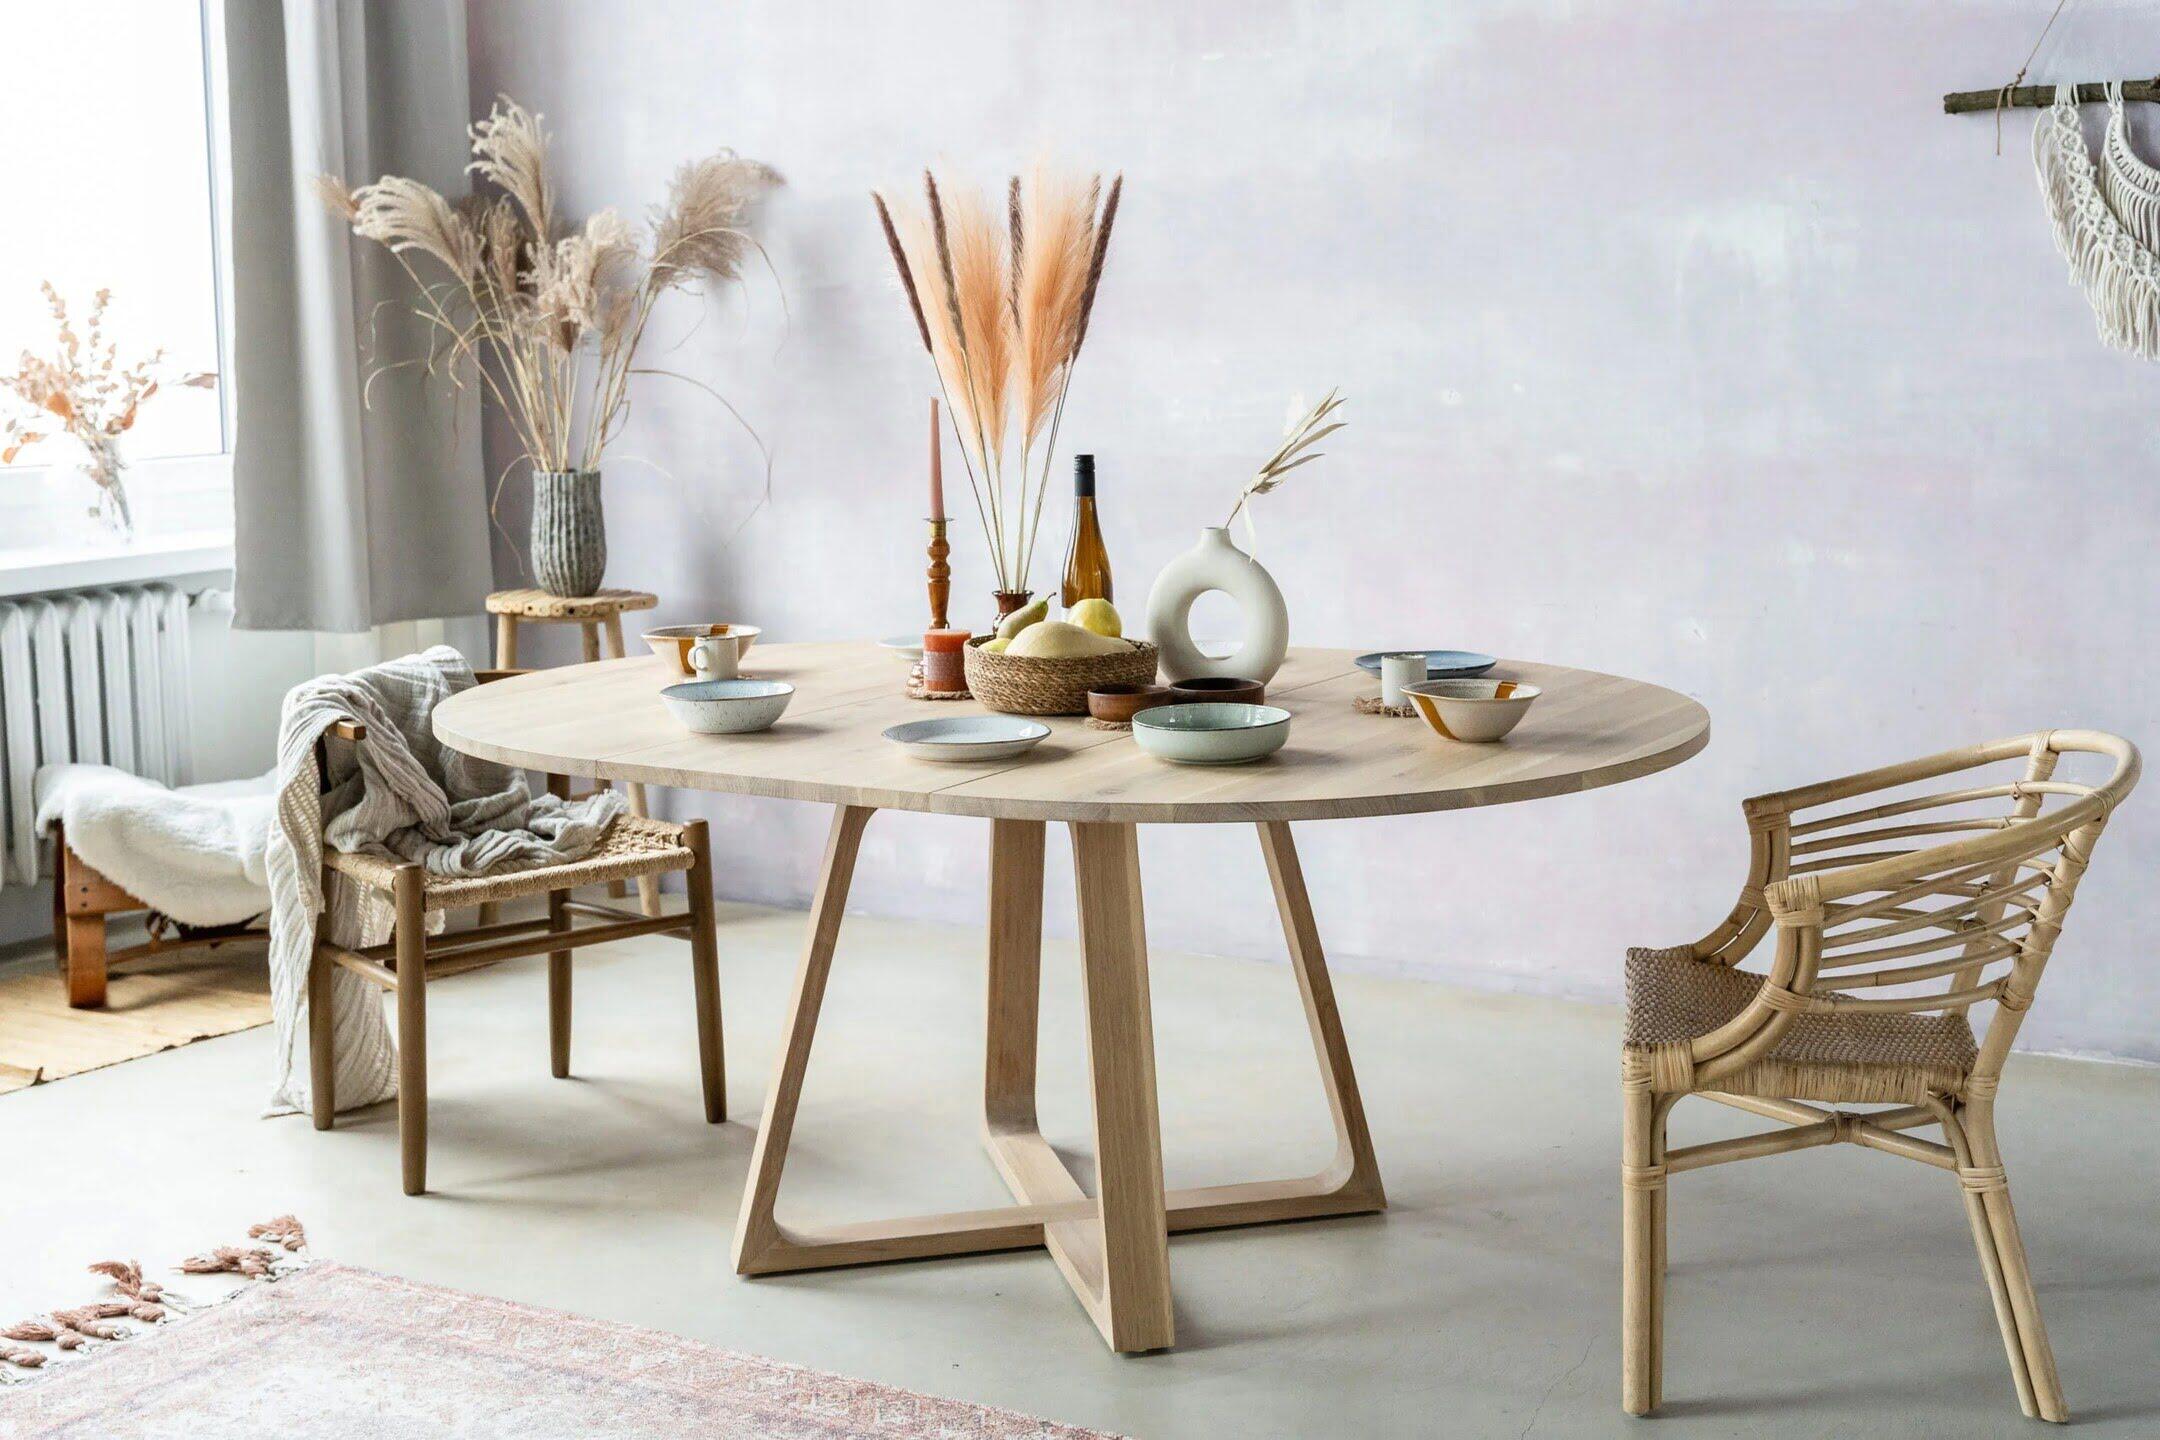 How To Style A Round Table